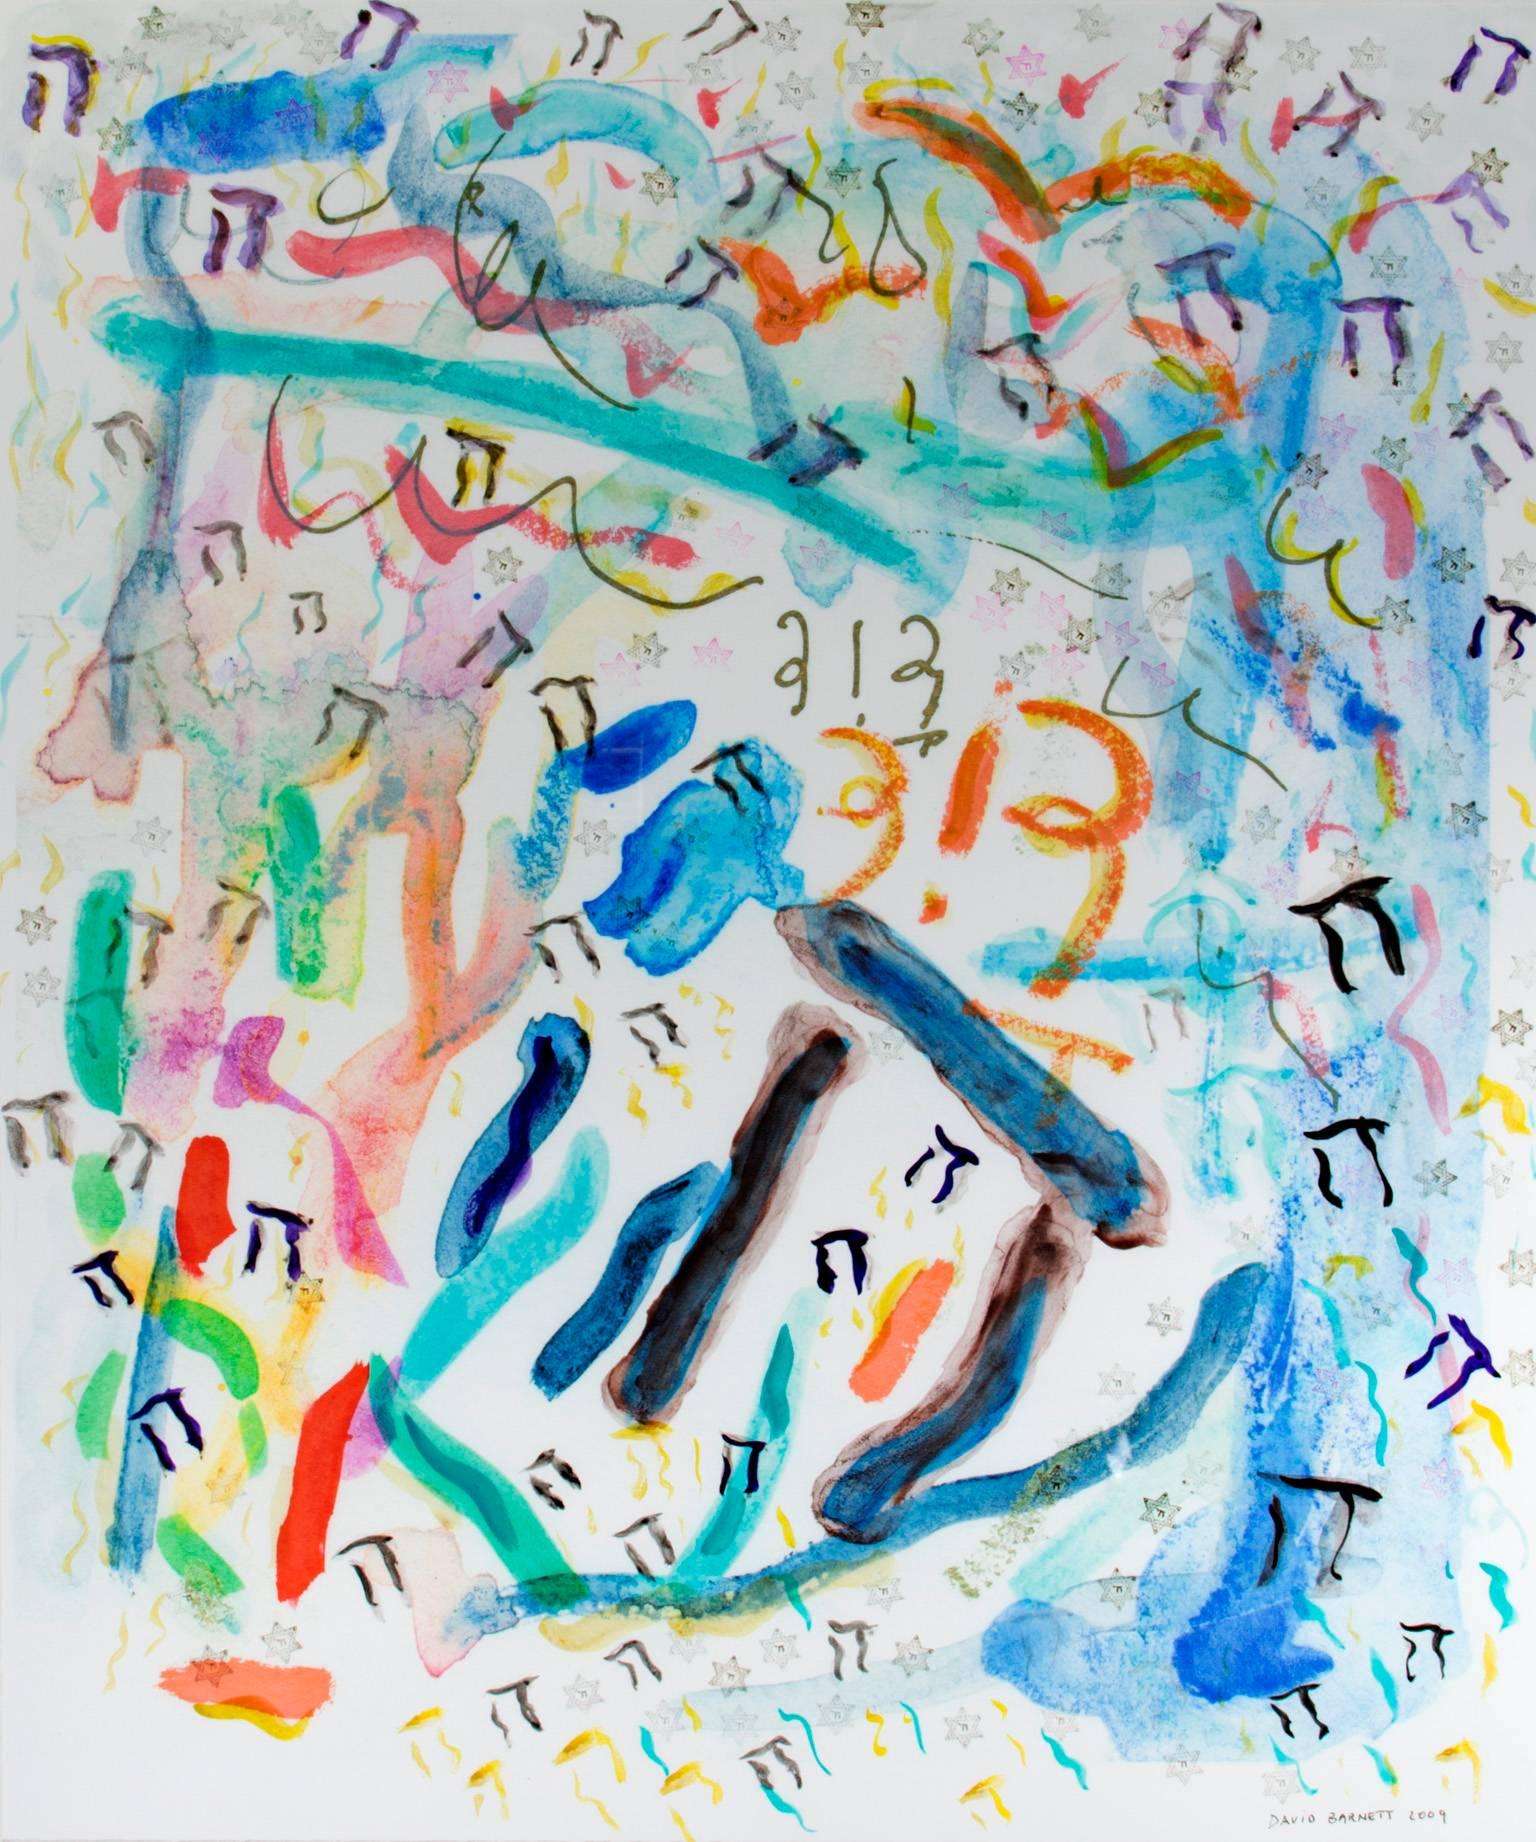 "Celebrate Life: L'Chaim" is a multicolored abstract mixed media piece by Wisconsin artist David Barnett. The Hebrew word "L' Chaim" translates to "to life" and is used as a toast to one's health or well-being. The artwork is signed and dated by the